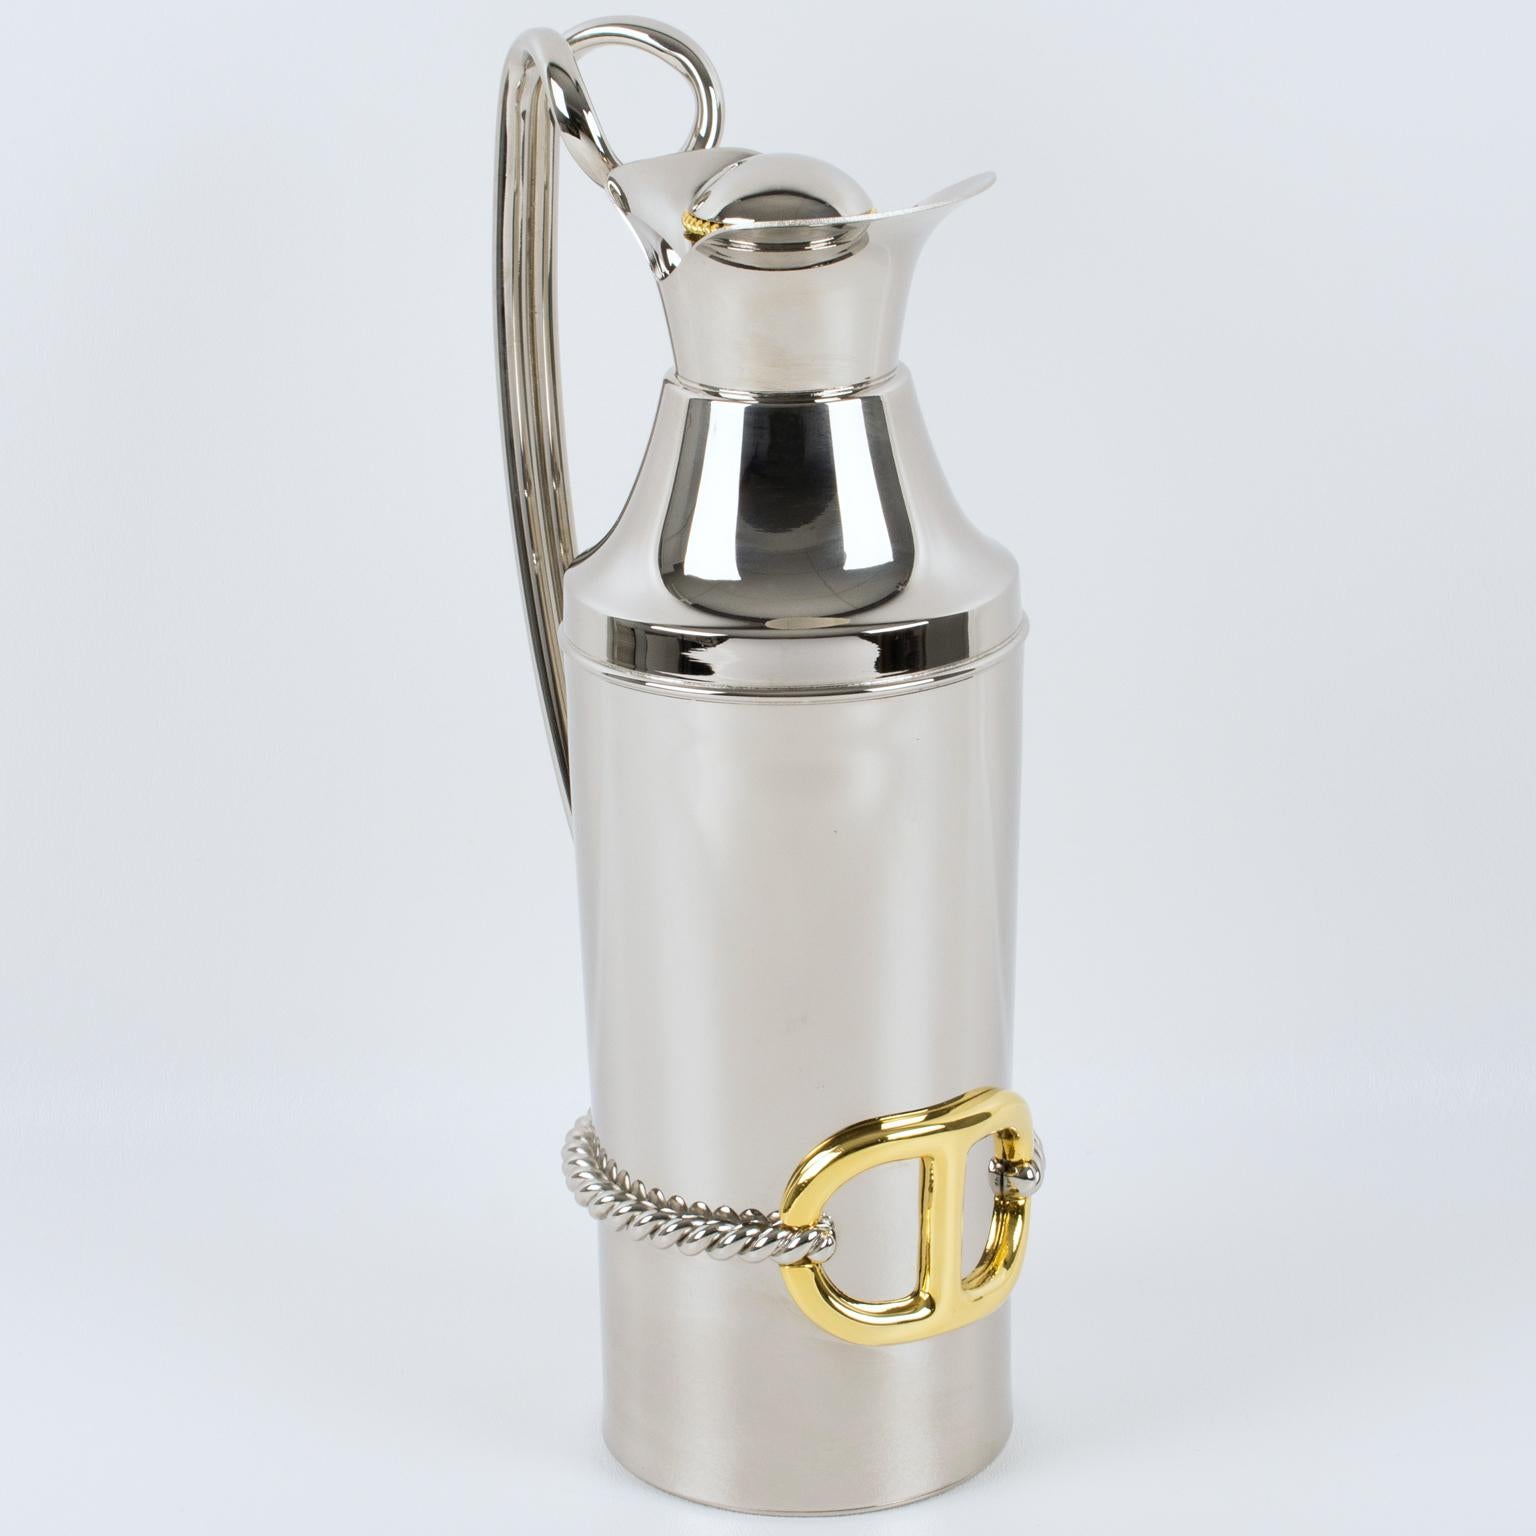 Gucci, Italy, crafted this luxury gold plated and silvered metal barware bar thermos, insulated decanter in the 1980s. This carafe features a sleek and modernist design made from silvered metal. 
The piece is adorned with a tall double-handle, 24K